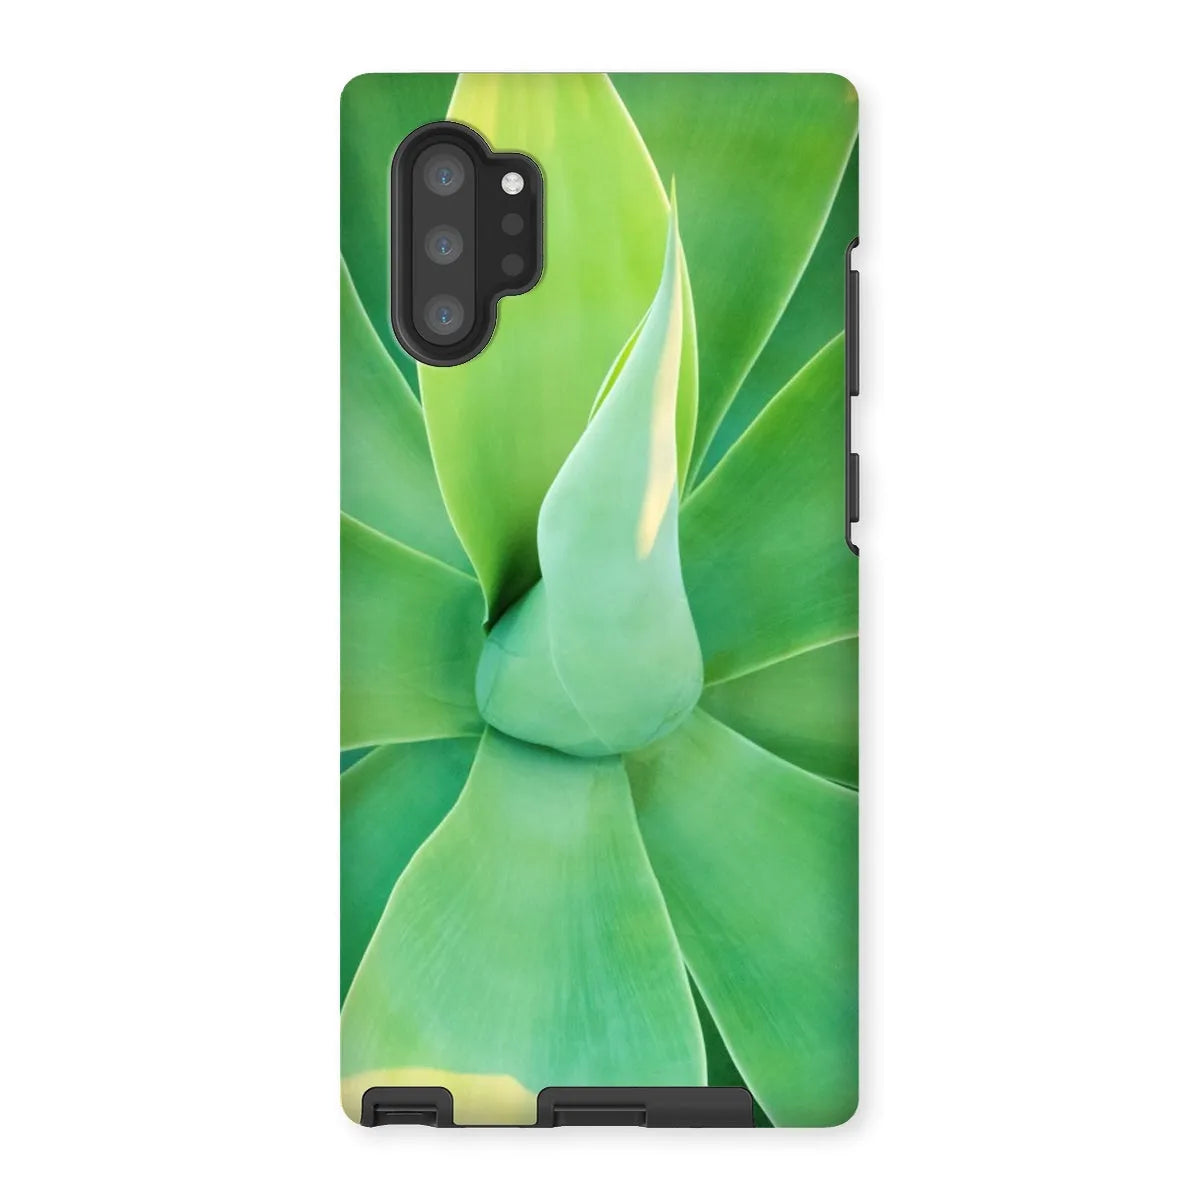 In Bloom Too Tough Phone Case - Samsung Galaxy Note 10p / Matte - Mobile Phone Cases - Aesthetic Art